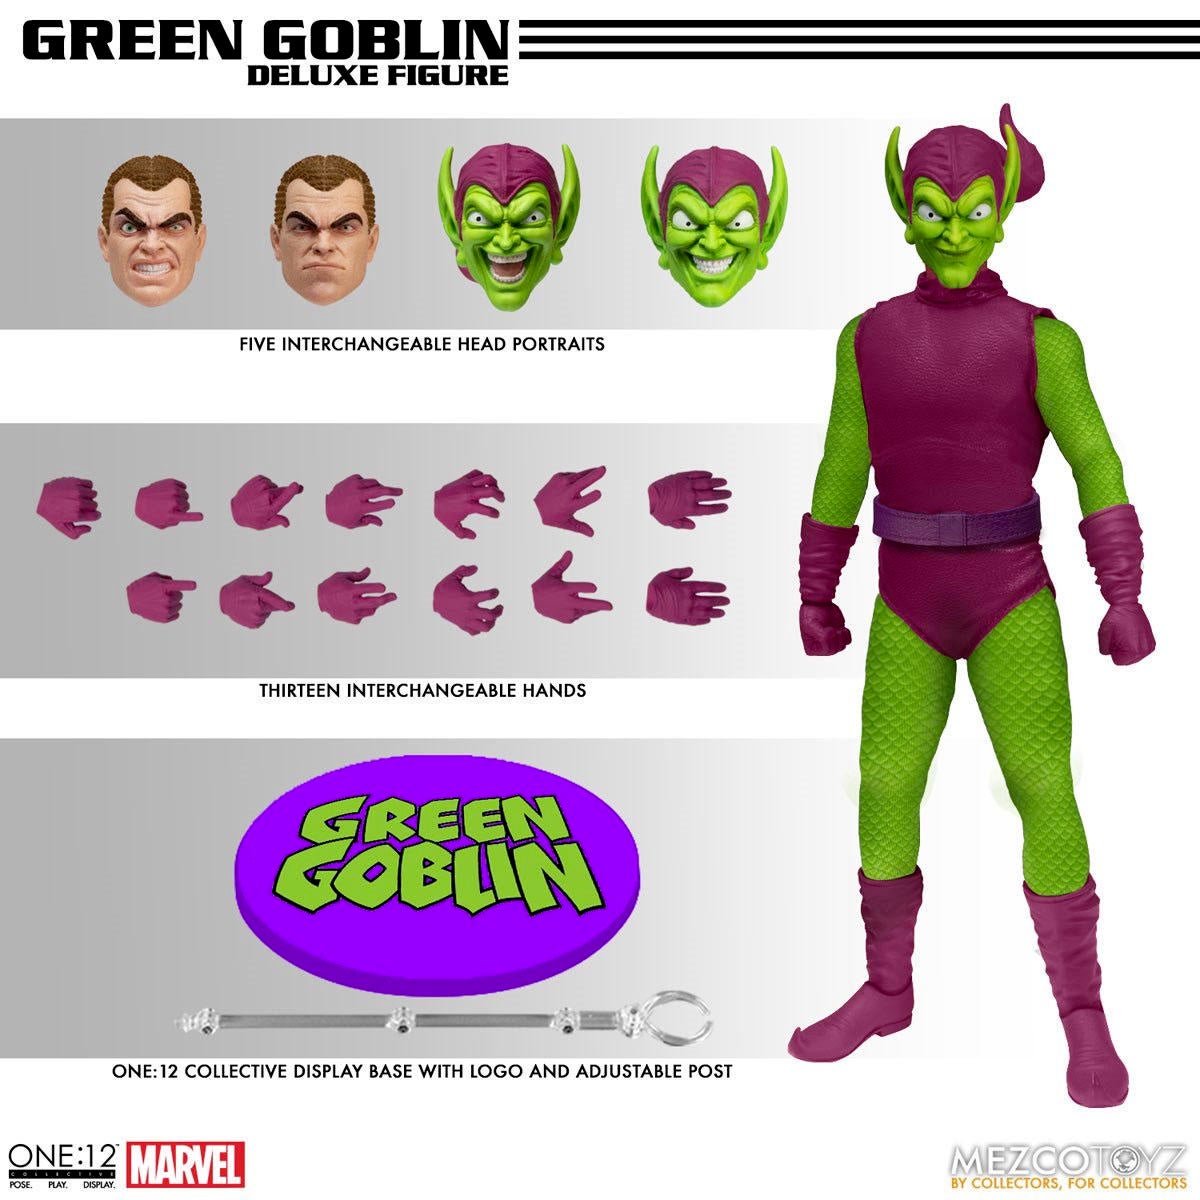 Spider-Man Green Goblin Deluxe One:12 Collective Action Figure Is up for Pre-Order